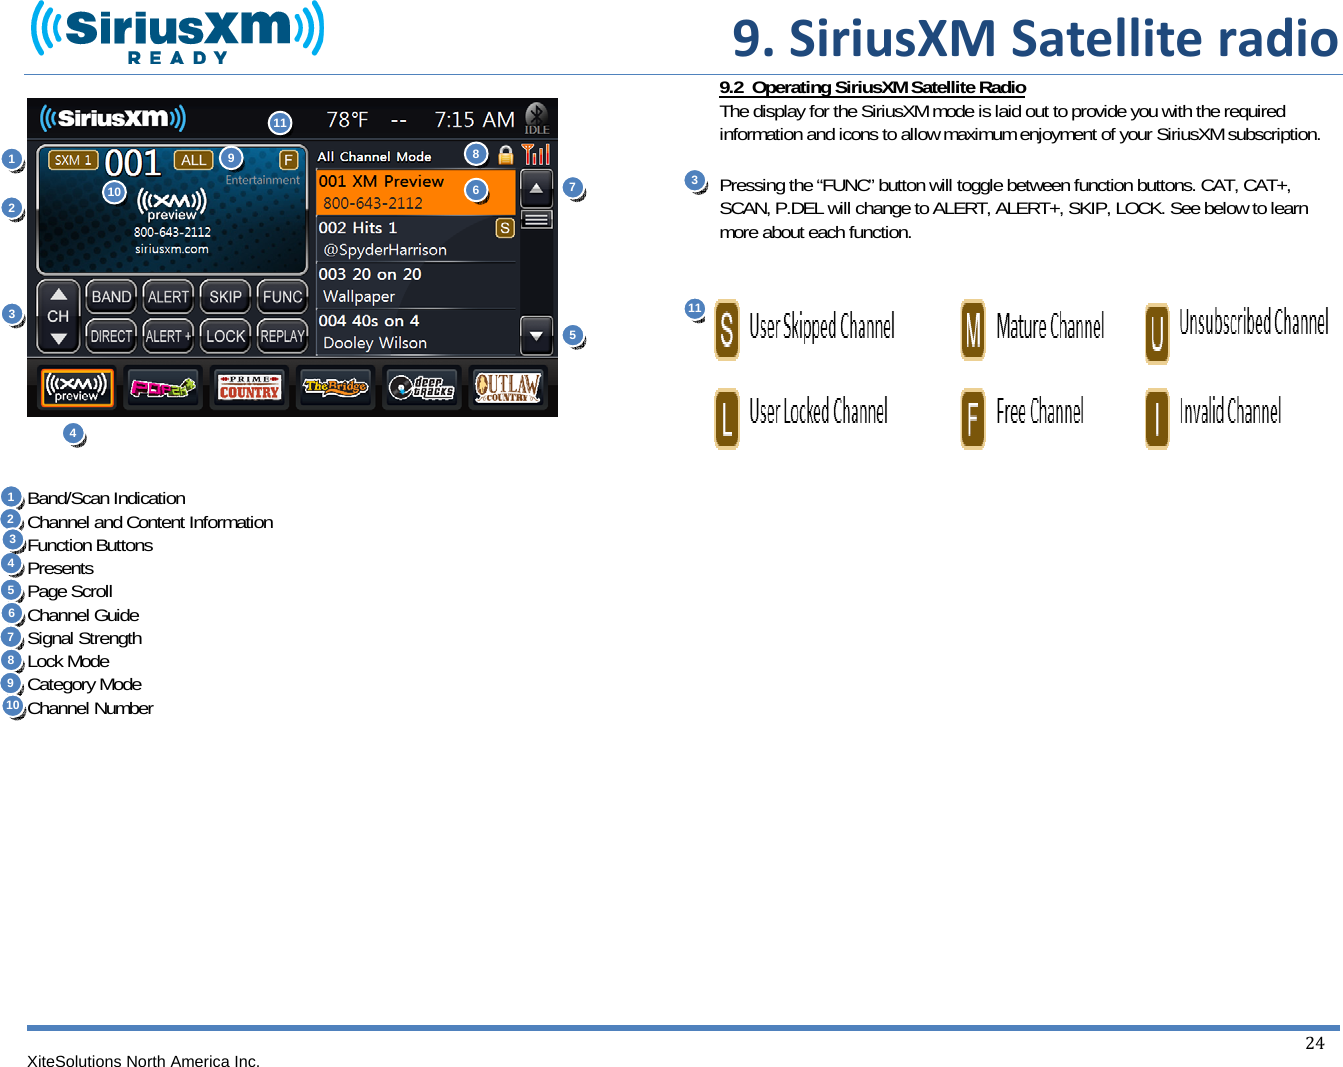  9.SiriusXMSatelliteradioXiteSolutions North America Inc.  24     Band/Scan Indication Channel and Content Information Function Buttons Presents Page Scroll Channel Guide Signal Strength Lock Mode Category Mode Channel Number             9.2  Operating SiriusXM Satellite Radio The display for the SiriusXM mode is laid out to provide you with the required information and icons to allow maximum enjoyment of your SiriusXM subscription.  Pressing the “FUNC” button will toggle between function buttons. CAT, CAT+, SCAN, P.DEL will change to ALERT, ALERT+, SKIP, LOCK. See below to learn more about each function.      1 52 3 4 6789 10111 2 3 45 6 7 8 9 10 11 3